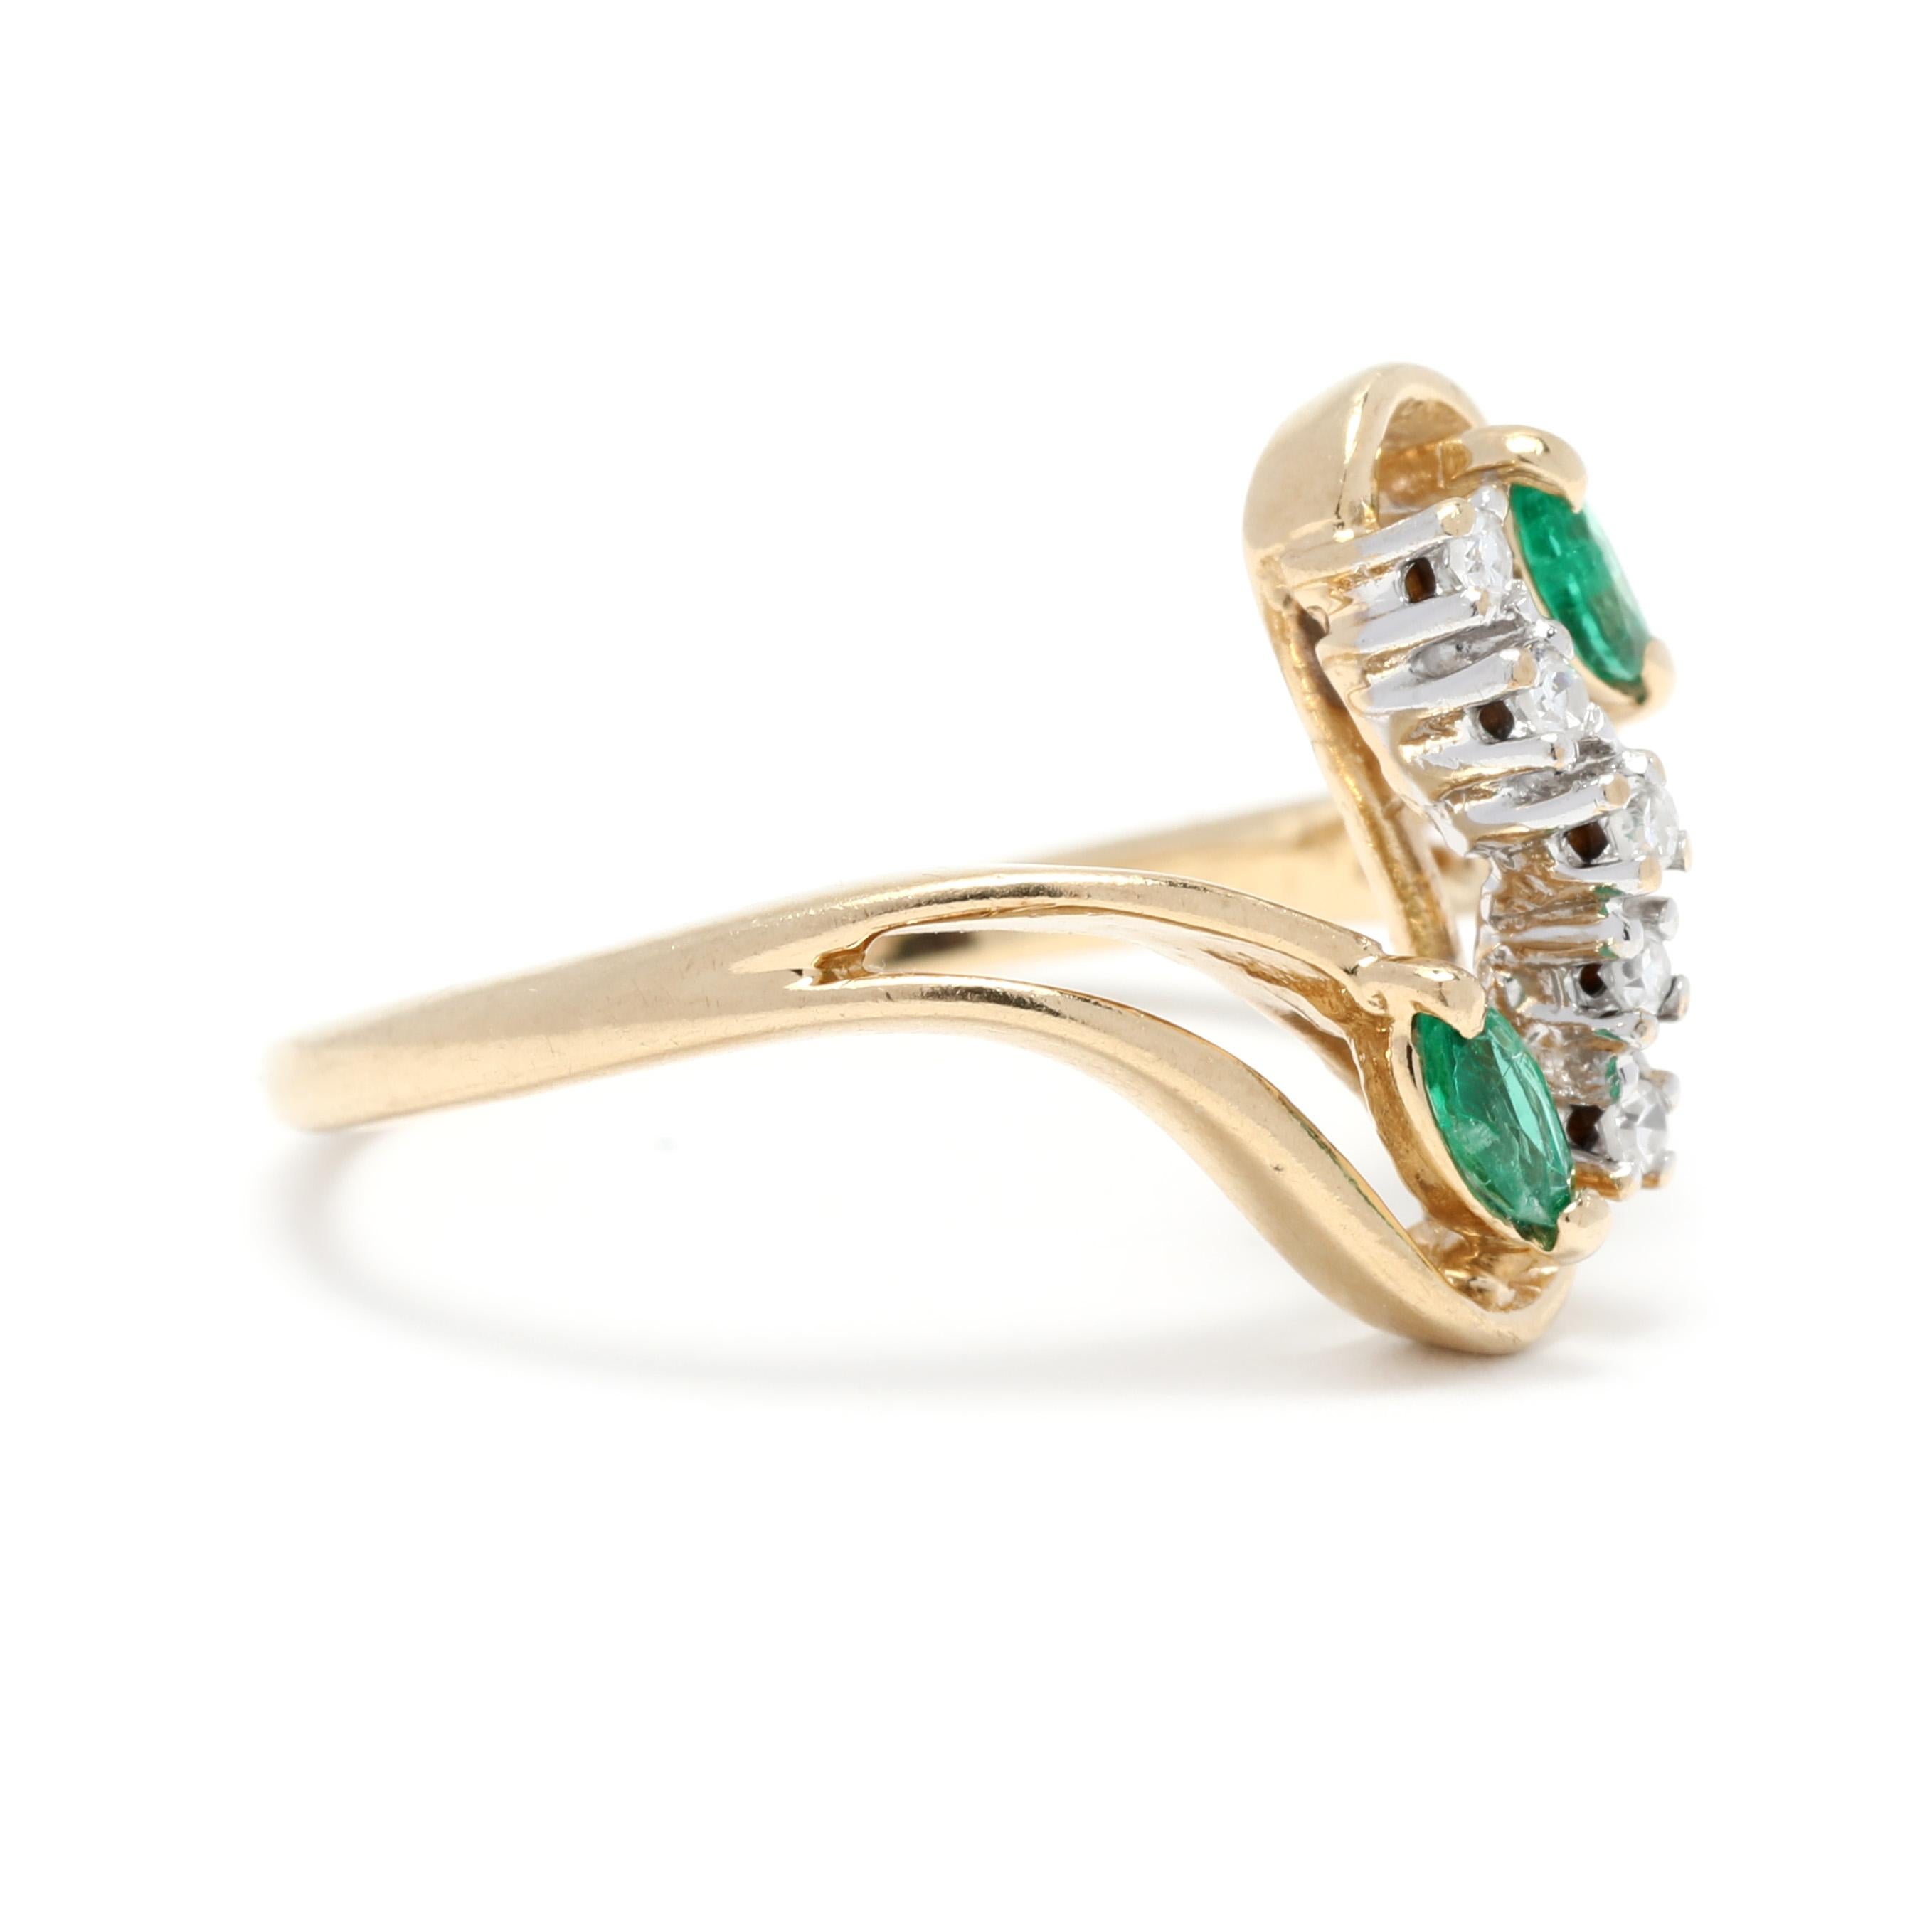 Create a style statement with this 0.14ctw Natural Emerald Diamond Ring in 14K Yellow Gold. The modernist swirl design features a 5.25 ring size and is sure to draw compliments. The sparkling emerald diamond center stone is perfectly complemented by